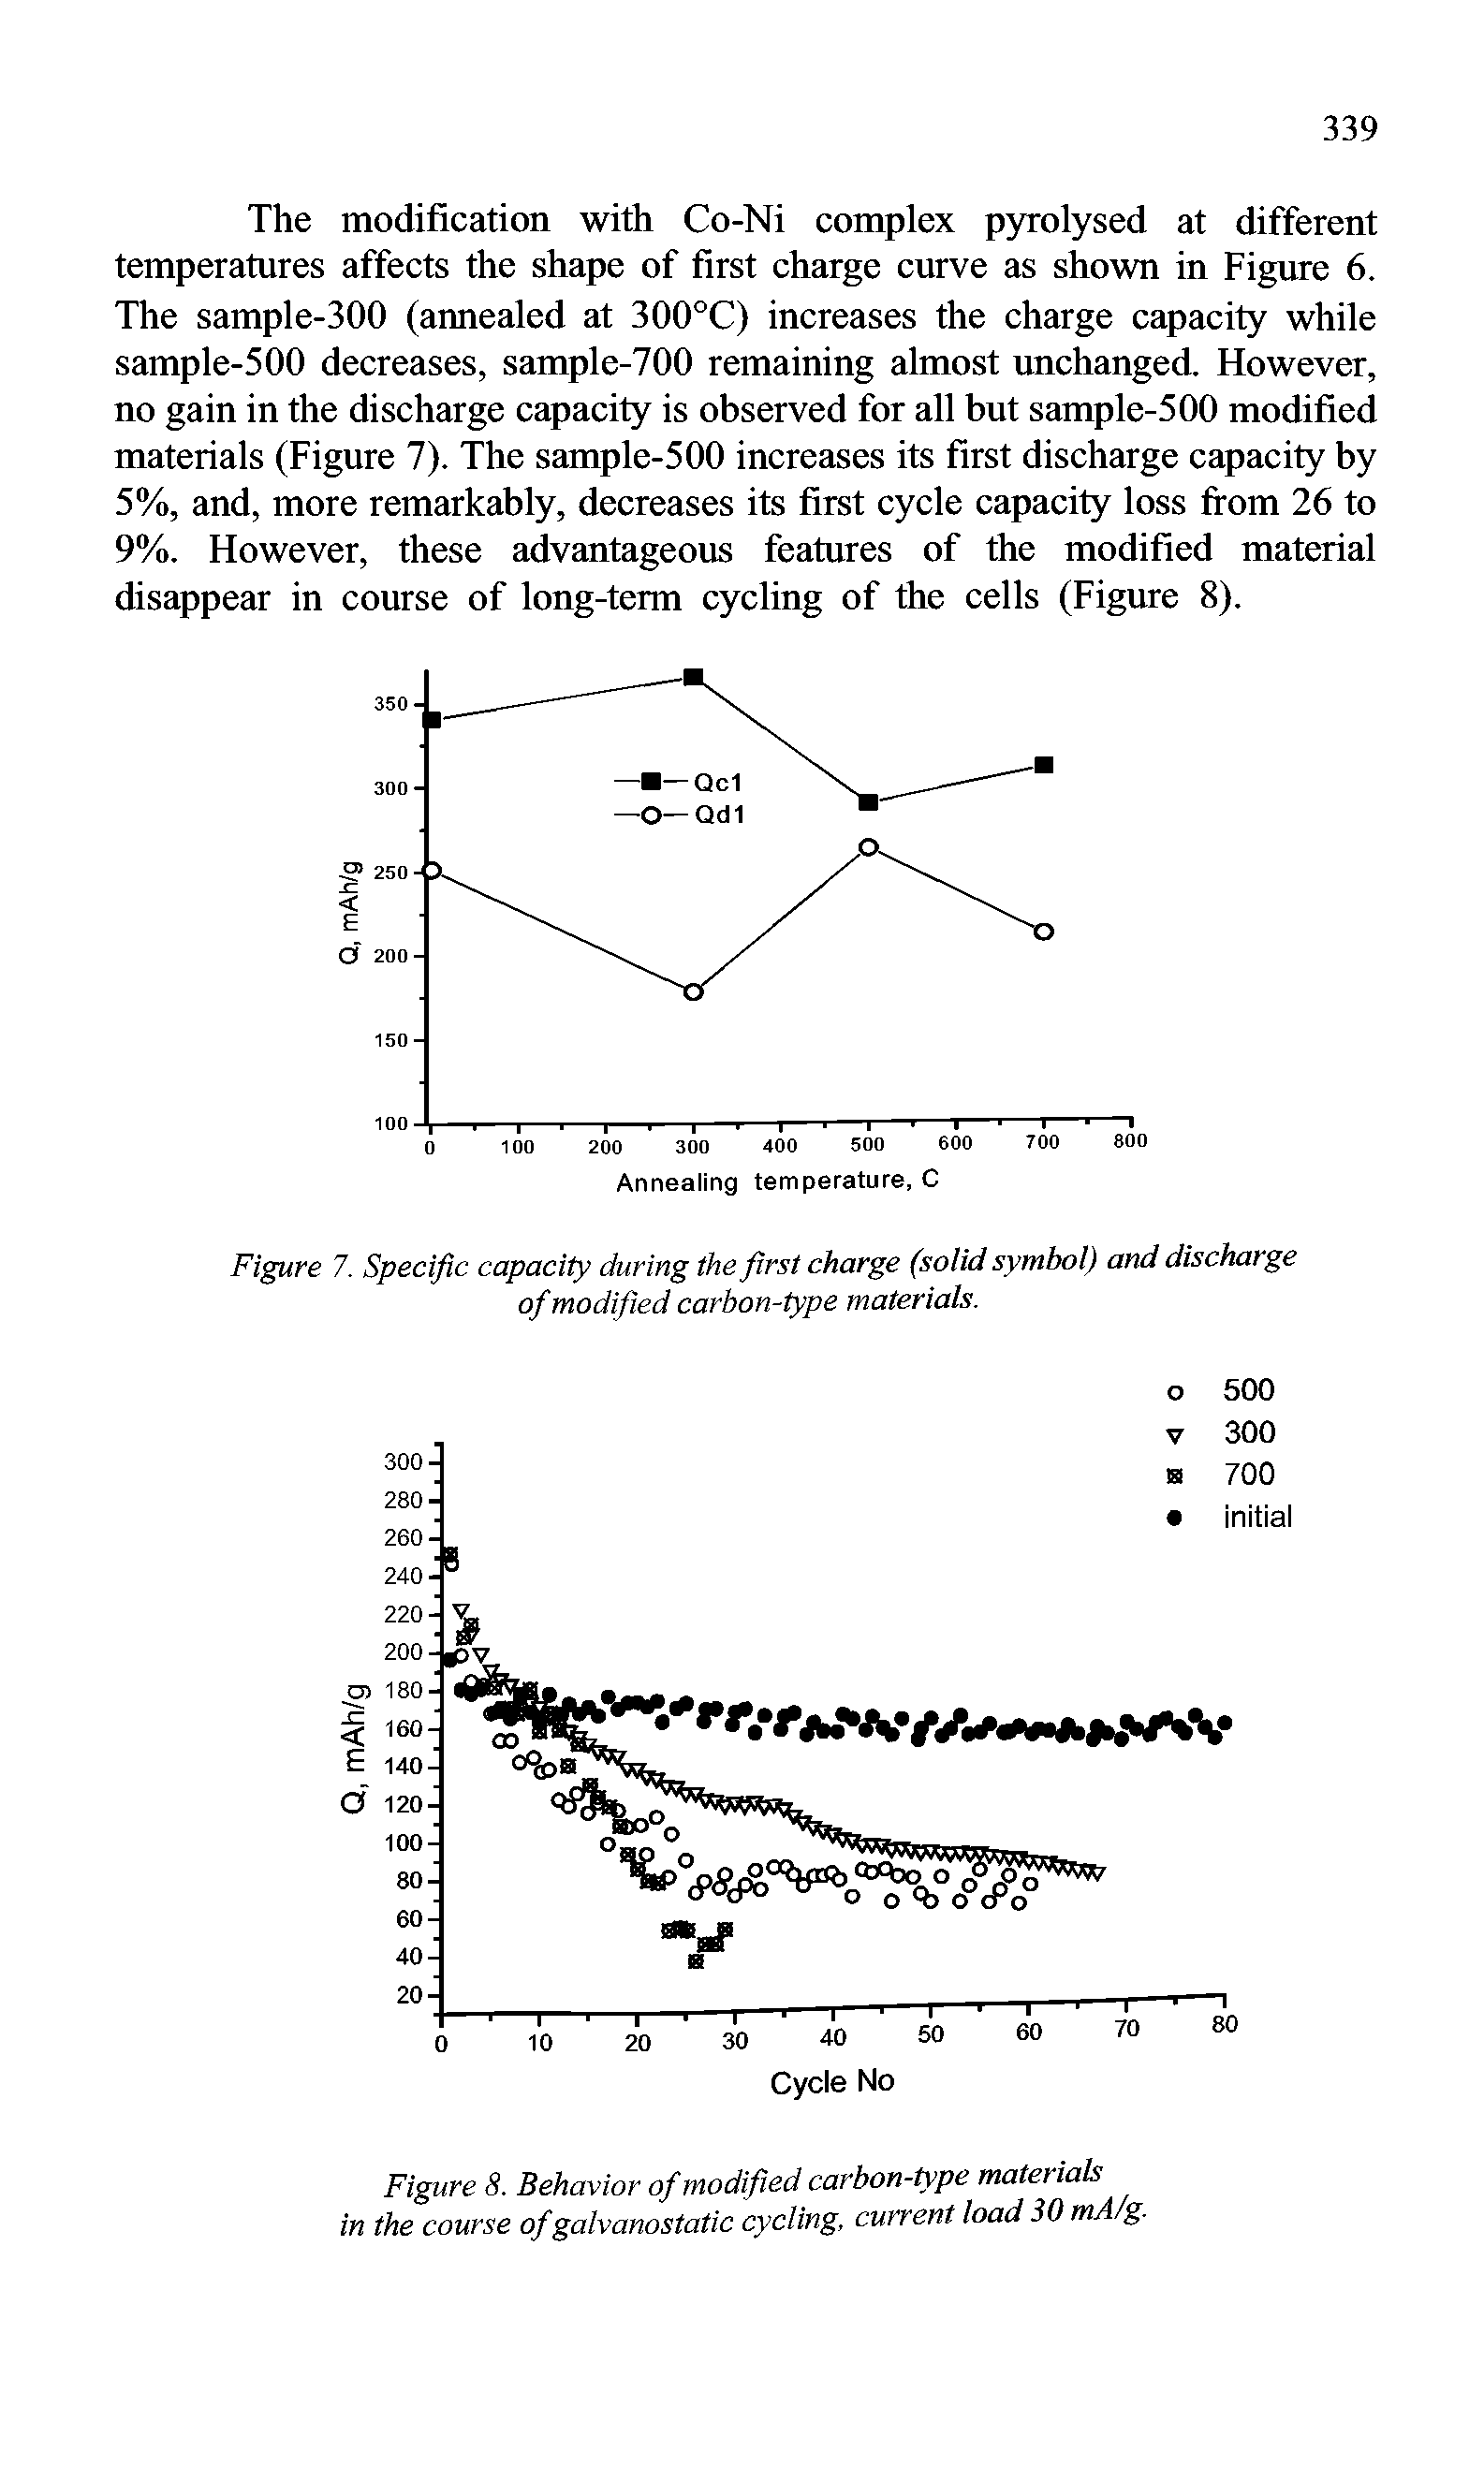 Figure 7. Specific capacity during the first charge (solid symbol) and discharge of modified carbon-type materials.